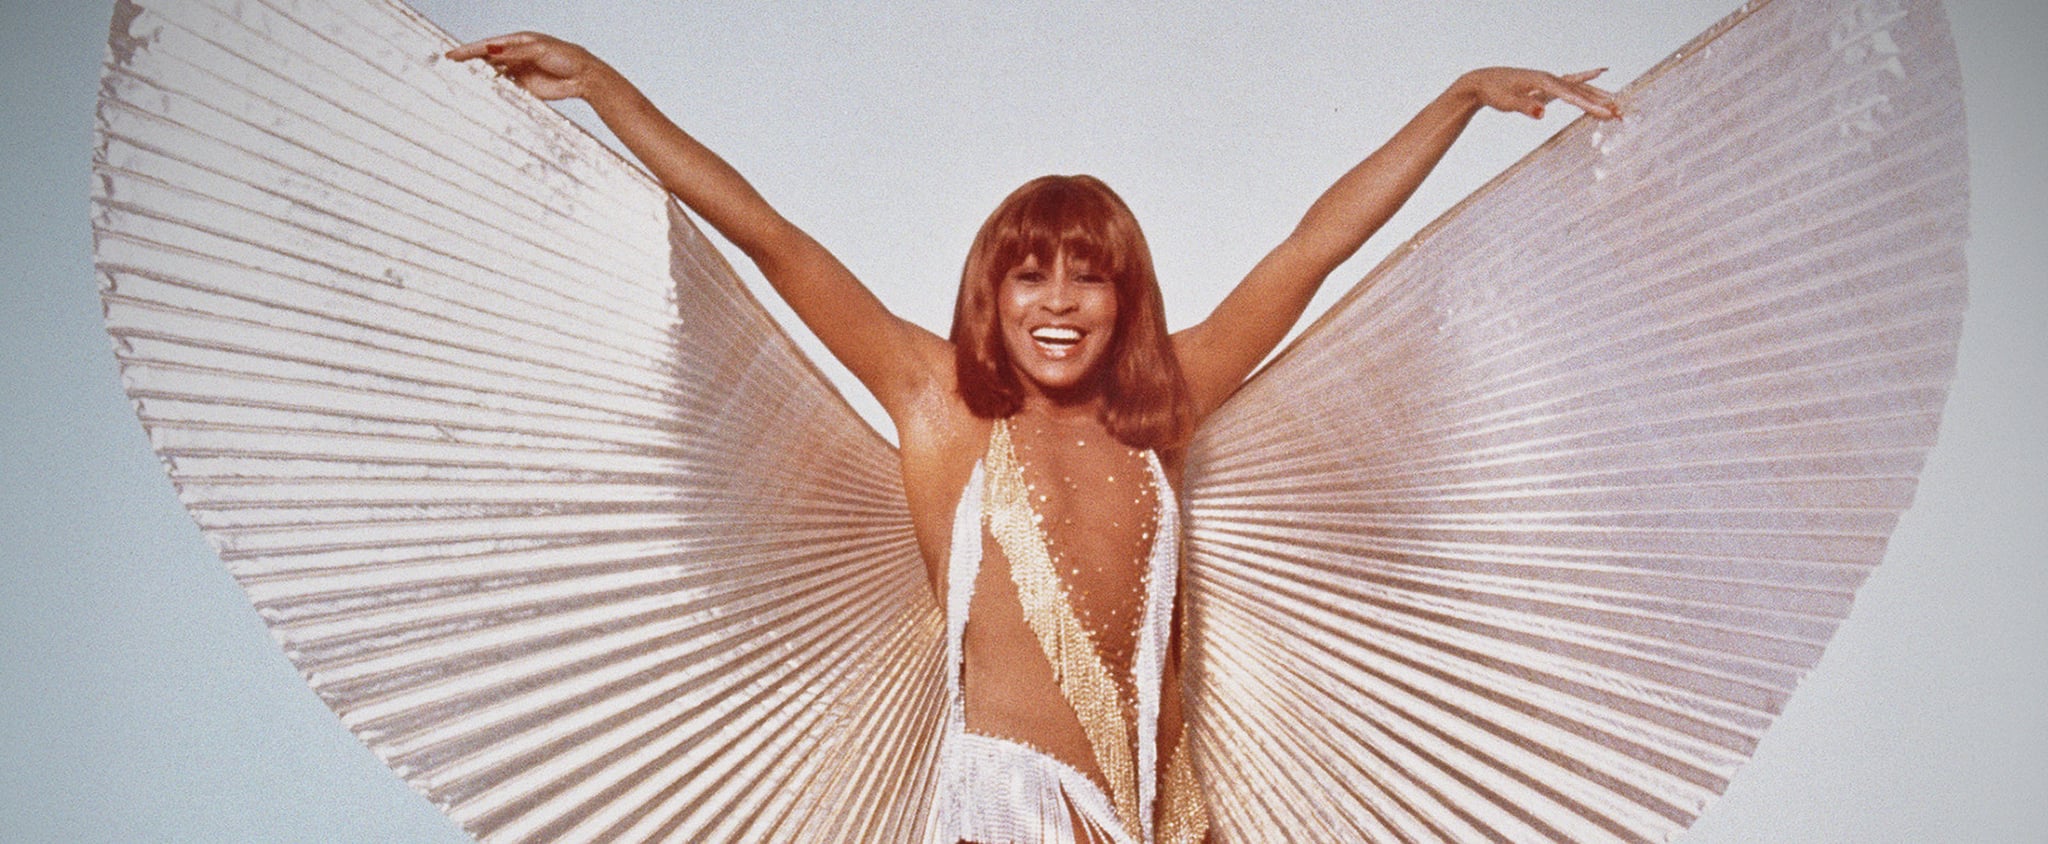 Tina Turner's Outfits, Style